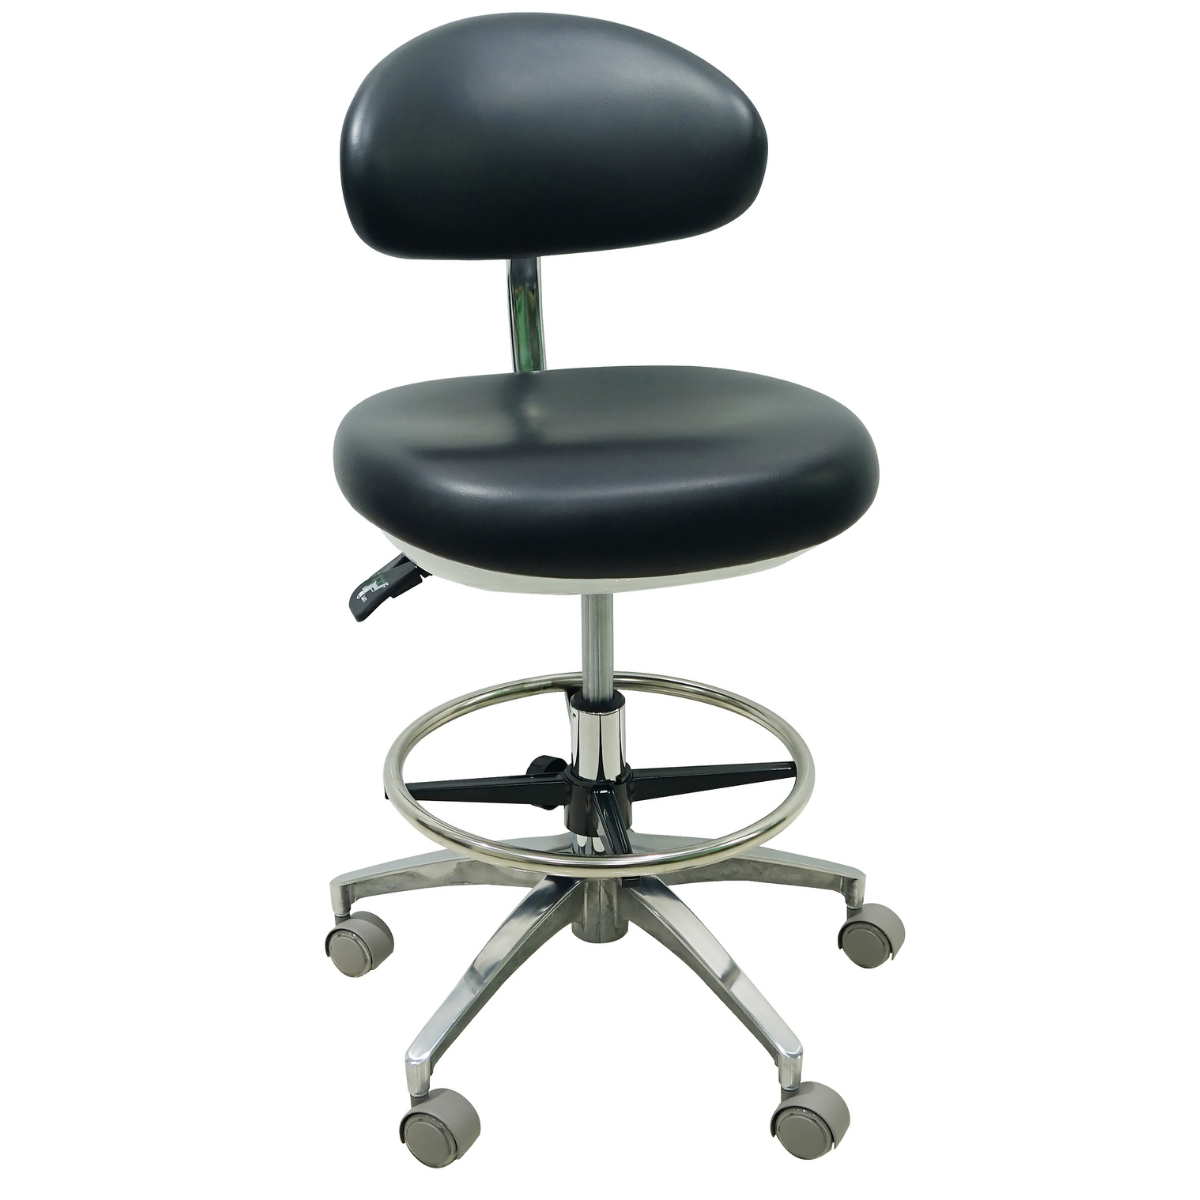 Ergonomic Medical or Dental Operator Chair with Concave Backrest and Footrest | Sit Helathier